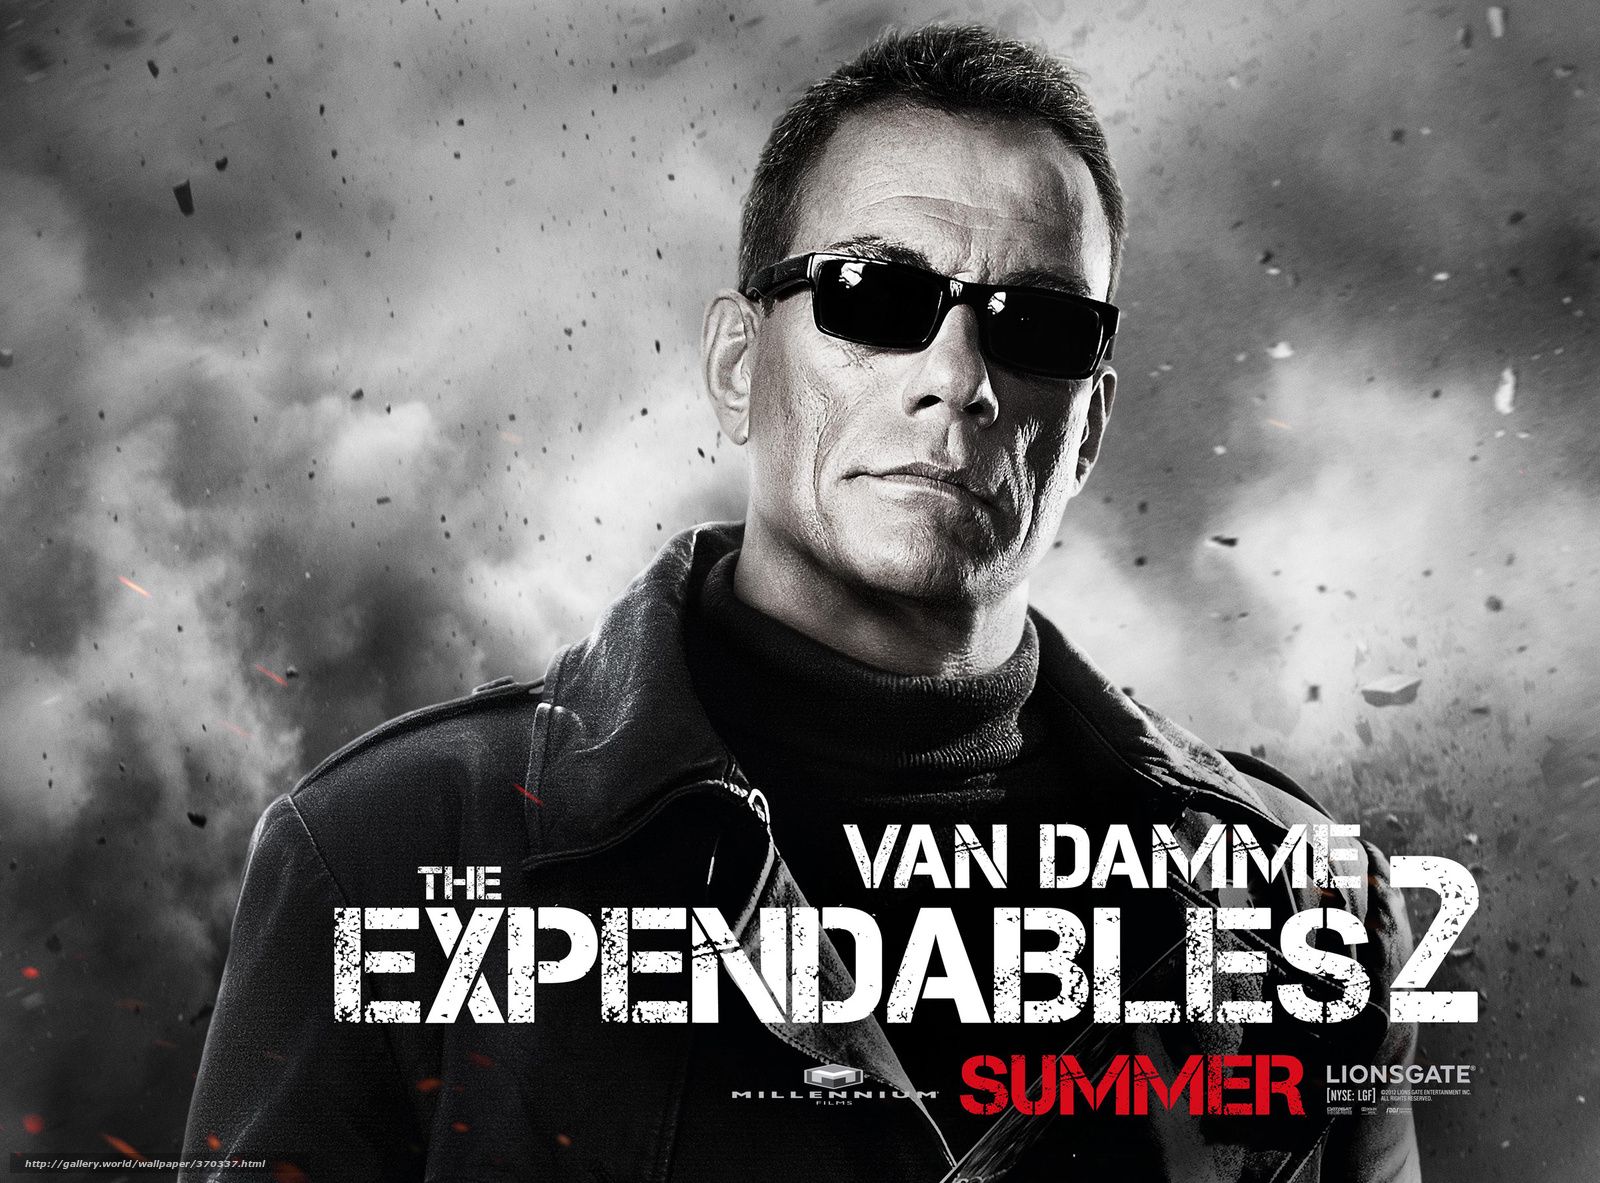 Download wallpaper The Expendables hero, thriller free desktop wallpaper in the resolution 2400x1775